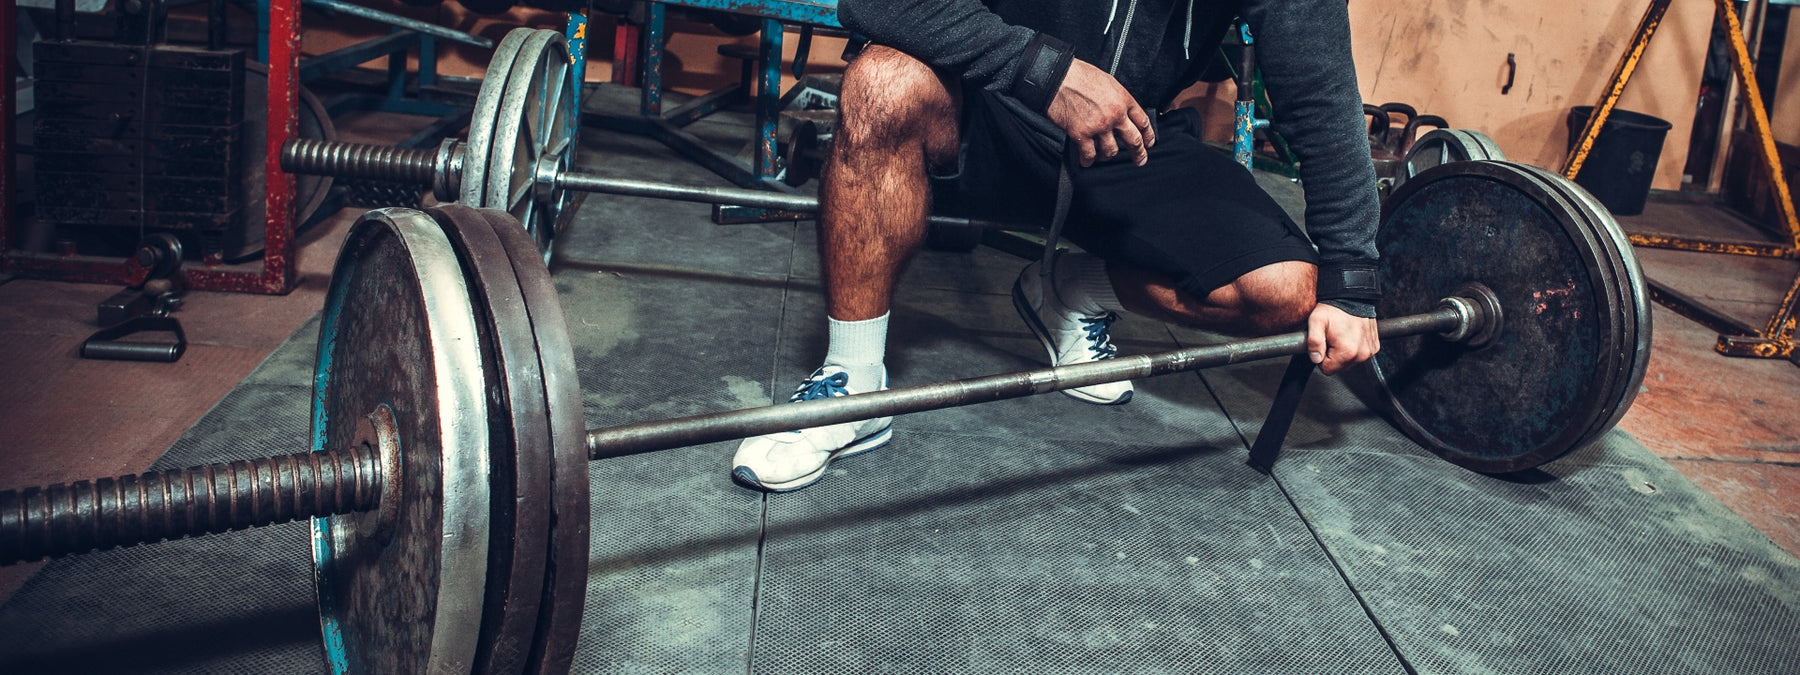 10 Deadlift Variations You Need to Try